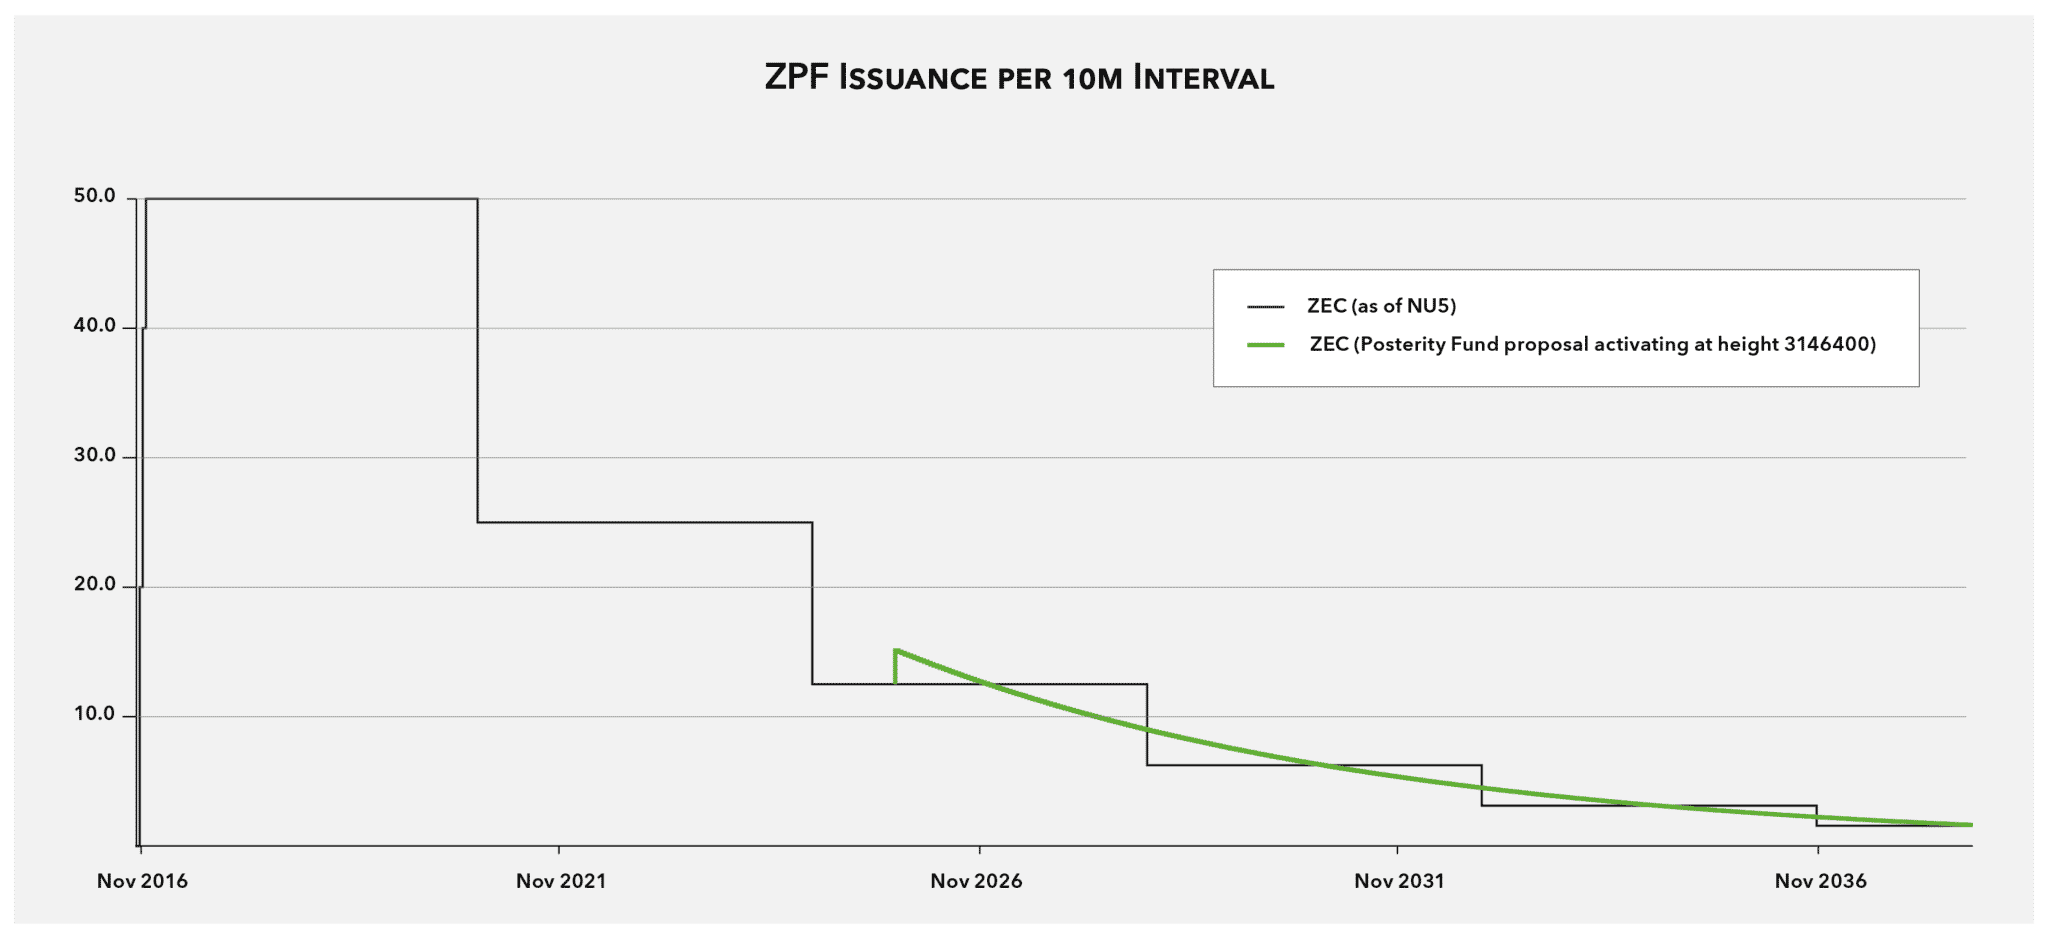 ZPF Issuance per 10m Interval as of nu5 Protocol 2048x939 2